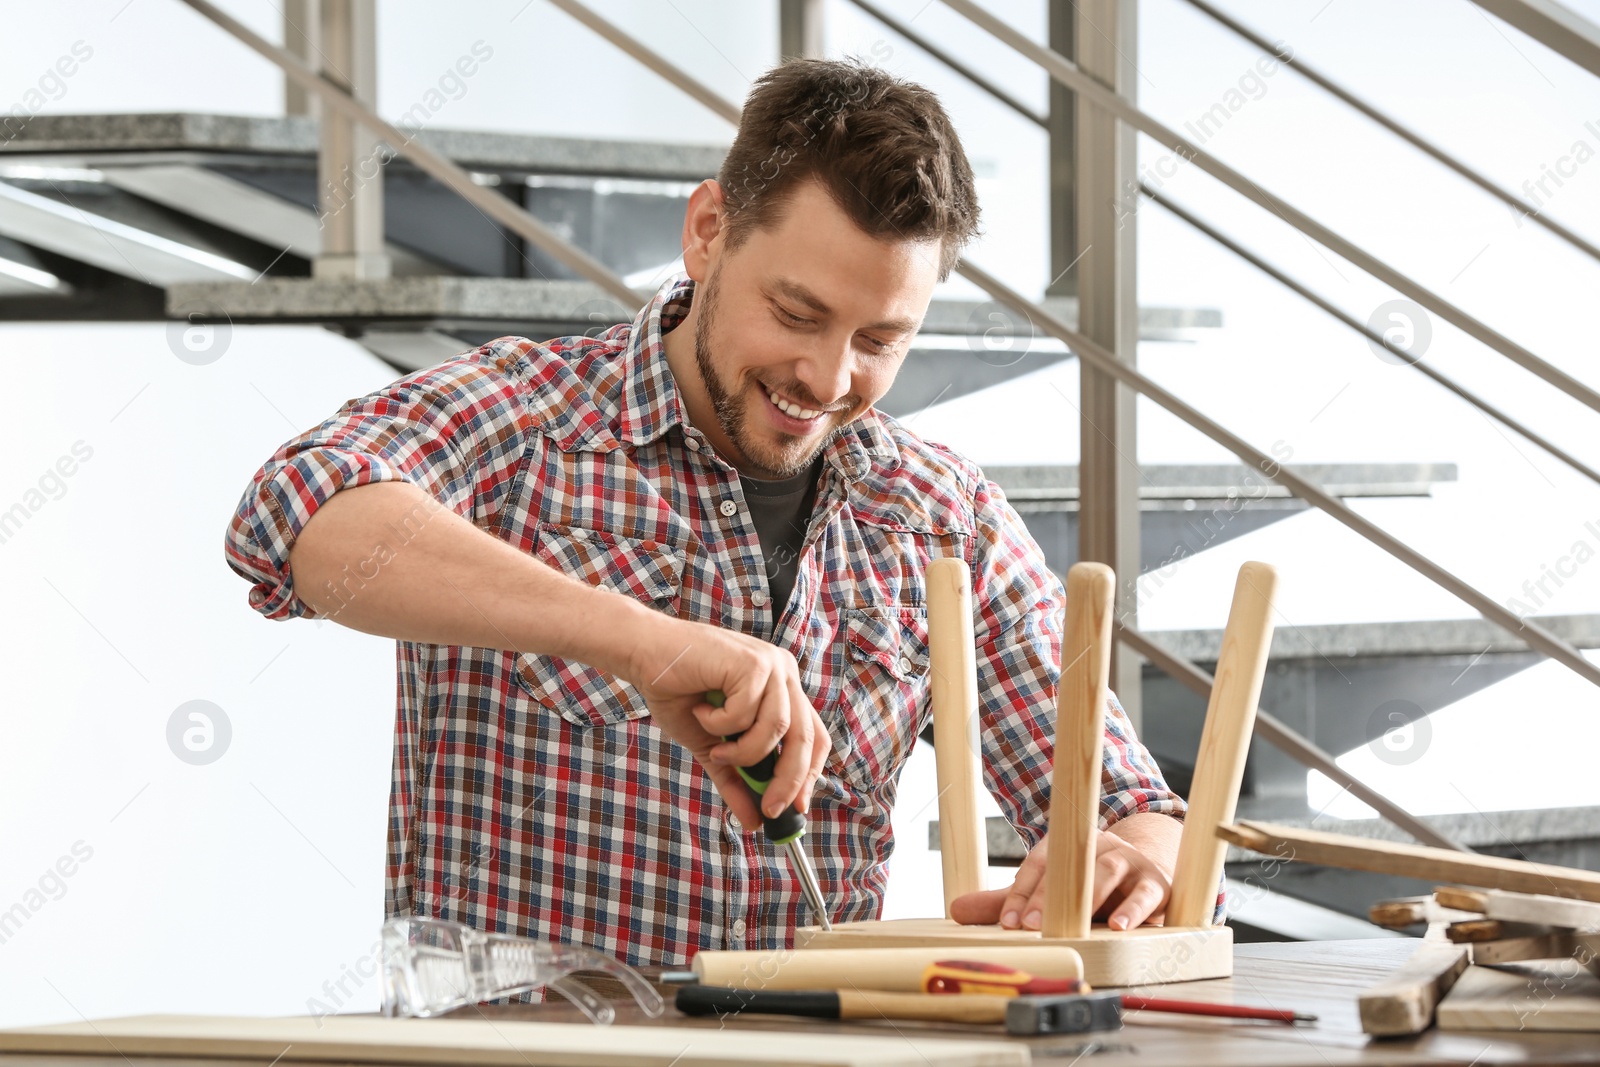 Photo of Handsome working man repairing wooden stool at table indoors